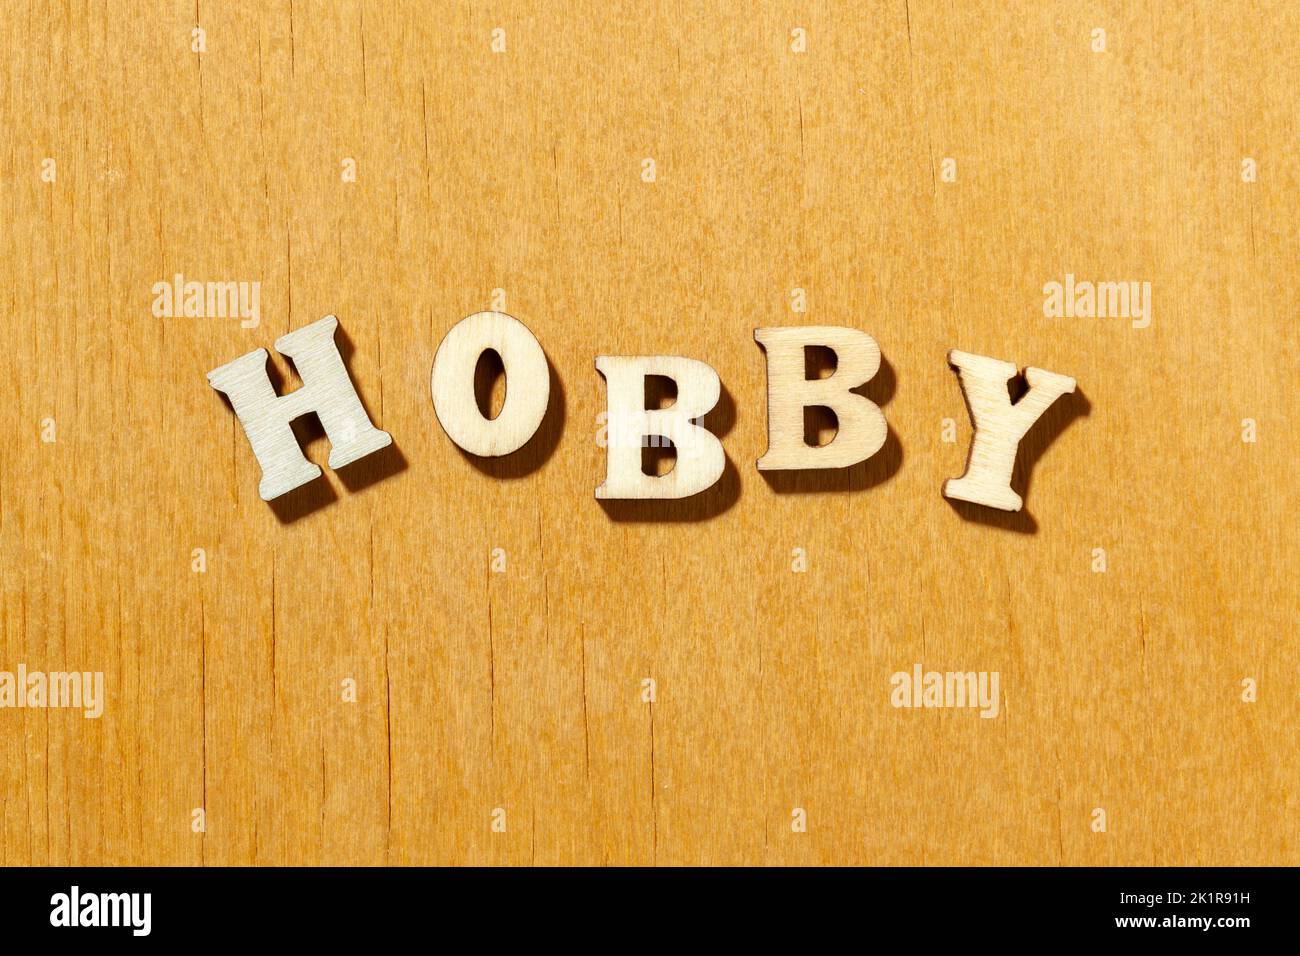 Word 'Hobby' by wooden letters close up Stock Photo